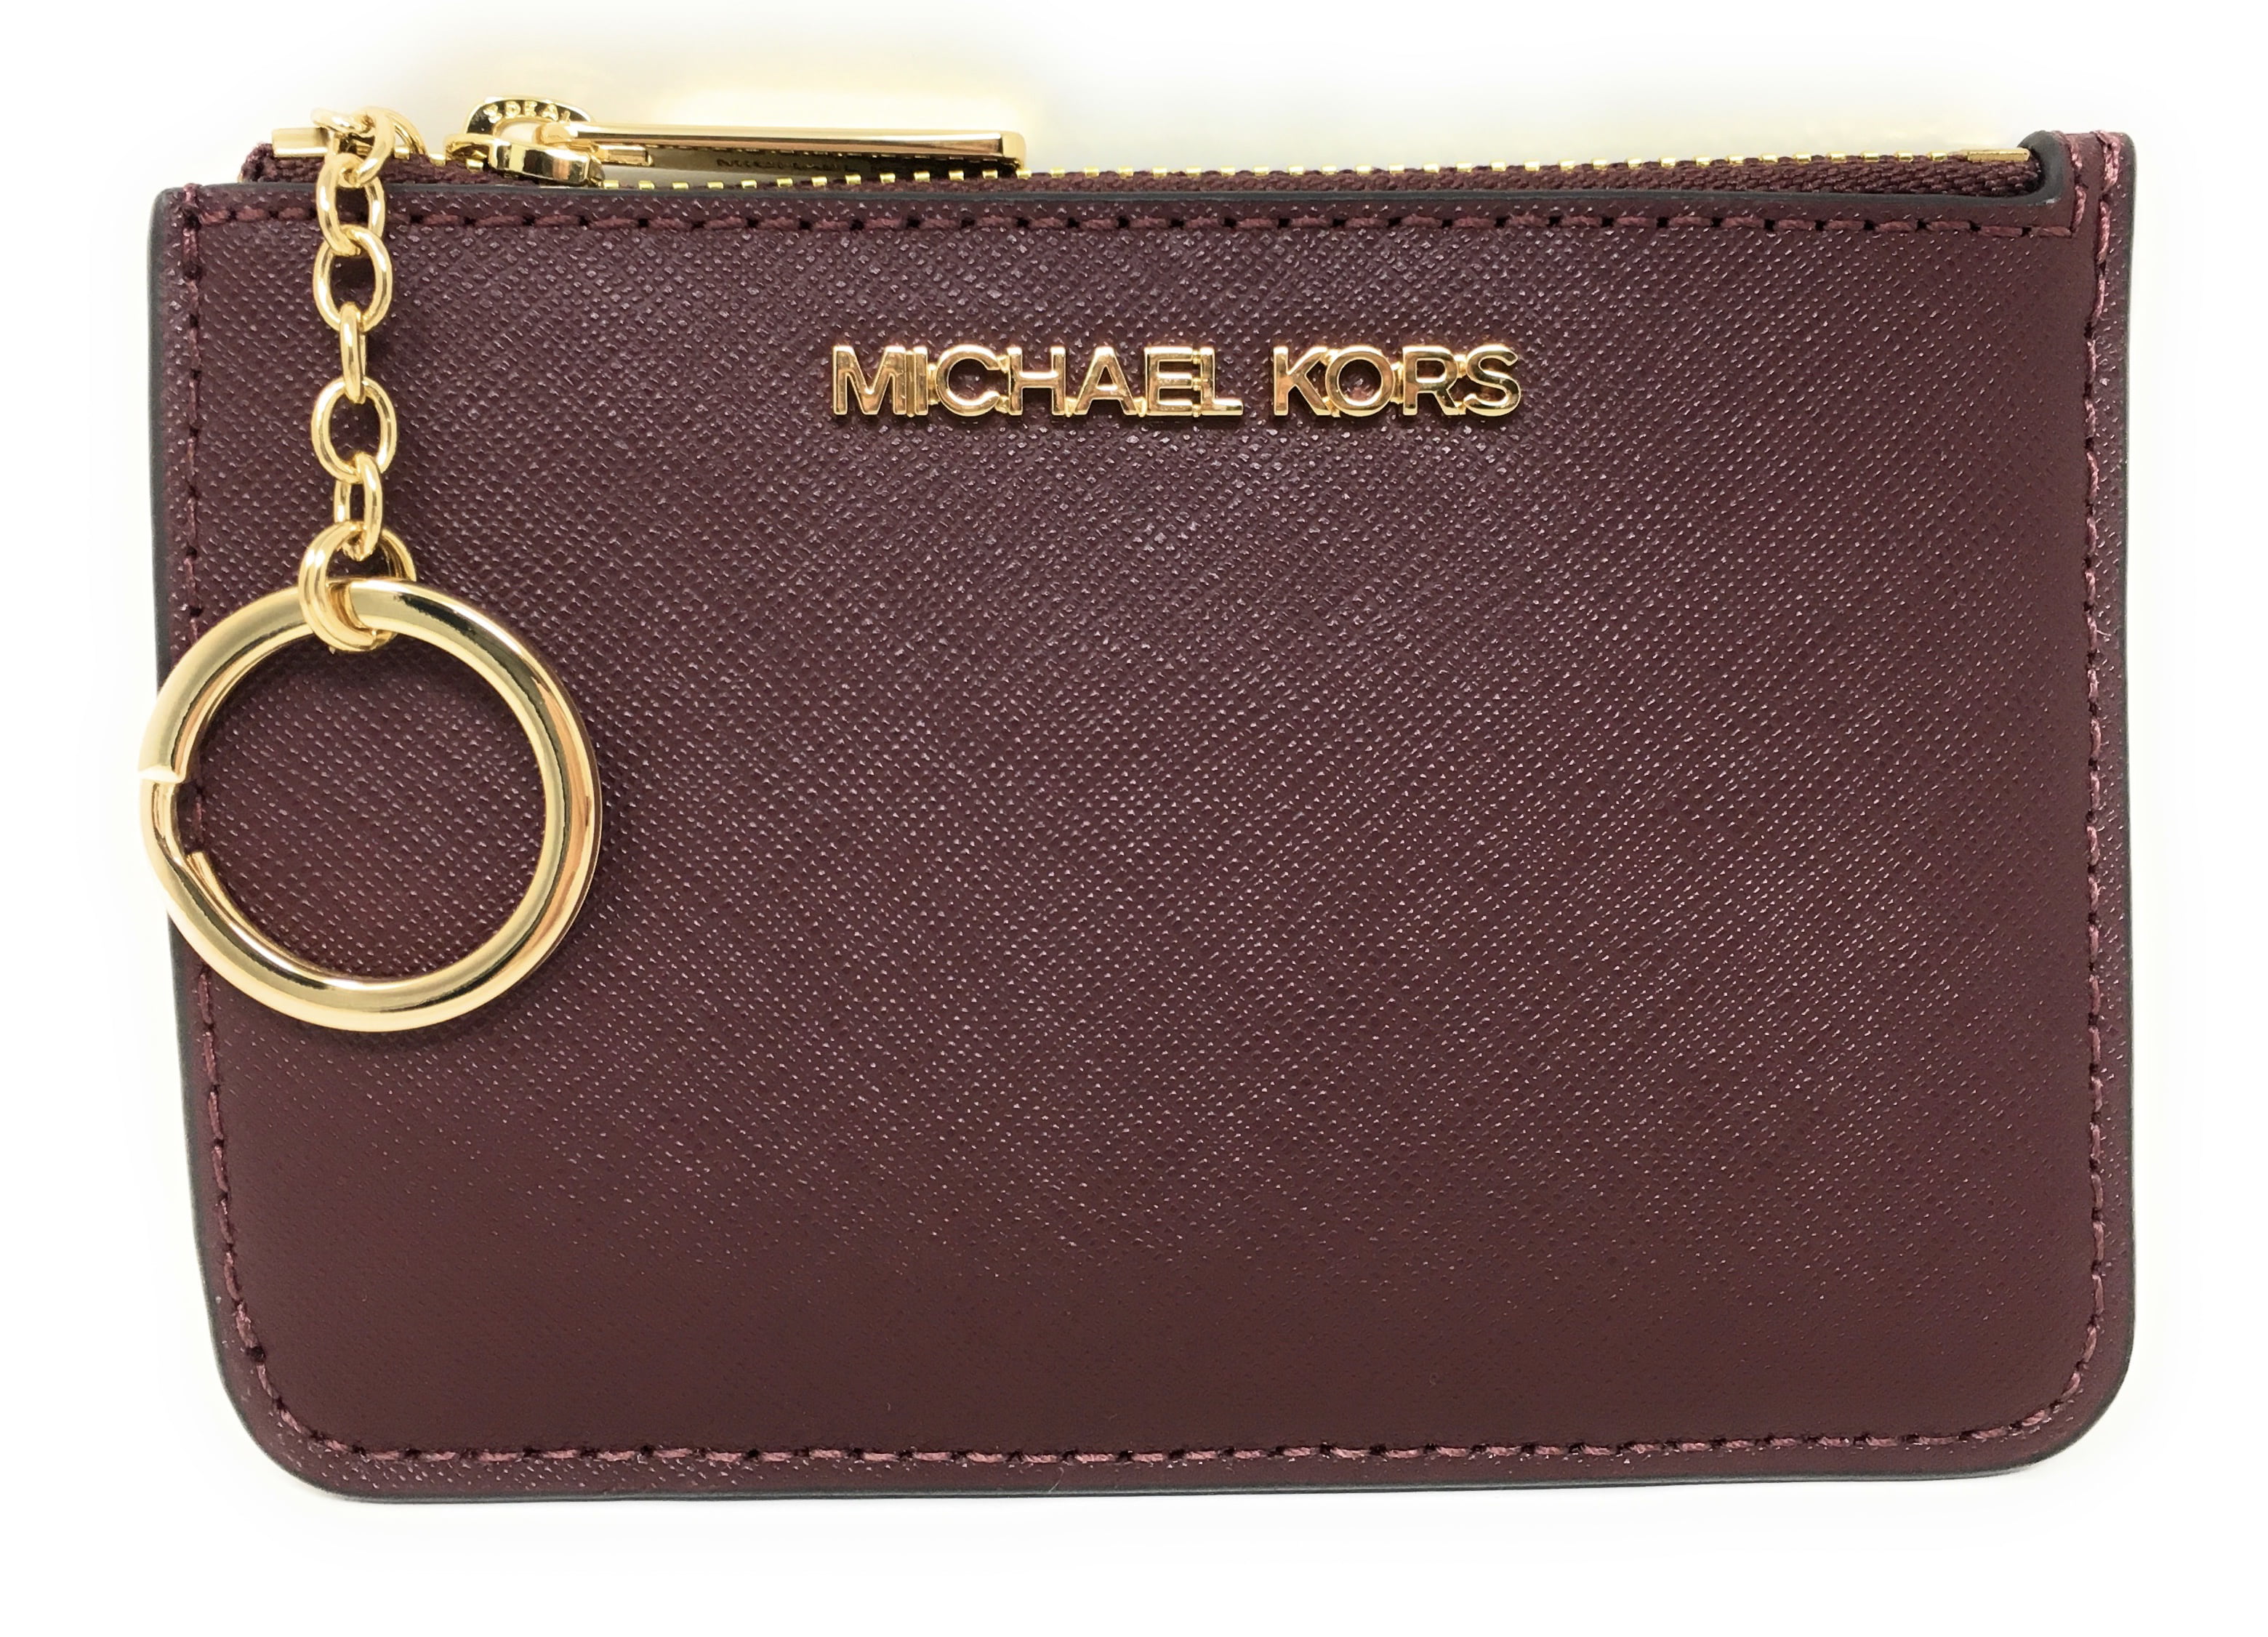 Michael Kors Brown Saffiano Leather Gold Chain Jet Set Small